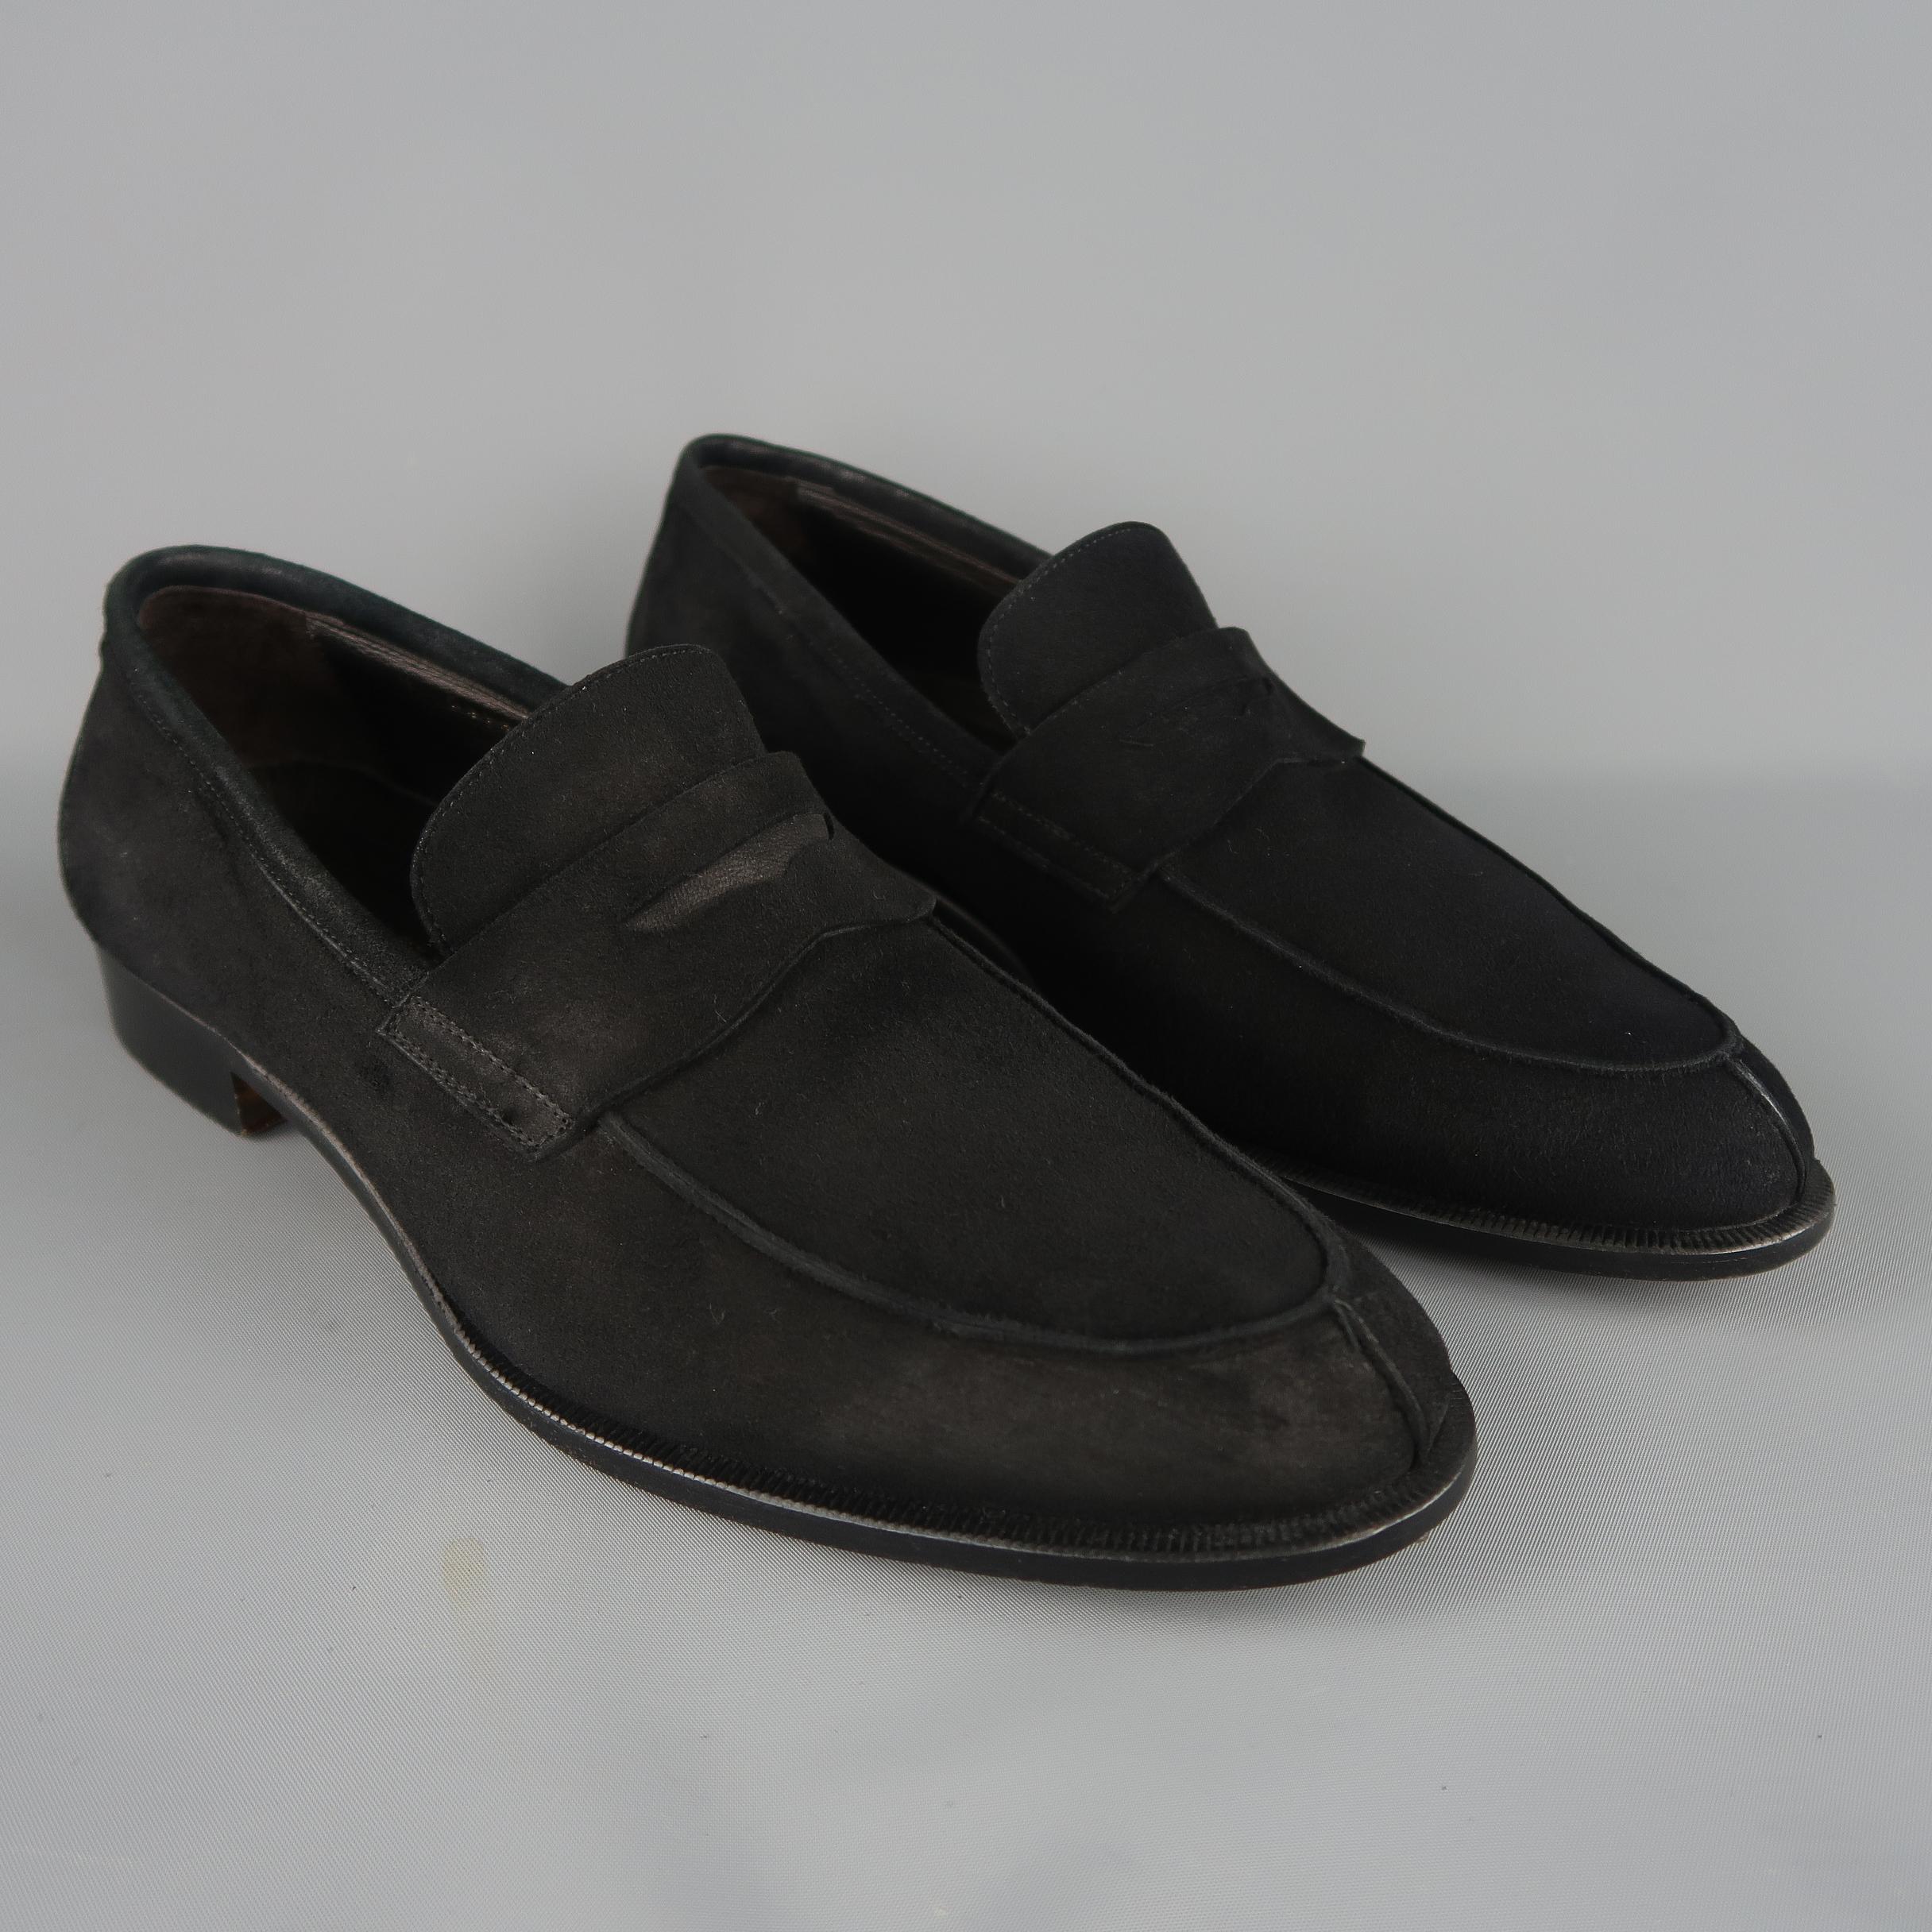 BRUNO MAGLI penny loafers come in black suede with a split apron toe and slit strap. Made in Italy.
 
Good Pre-Owned Condition.
Marked: UK 9.5